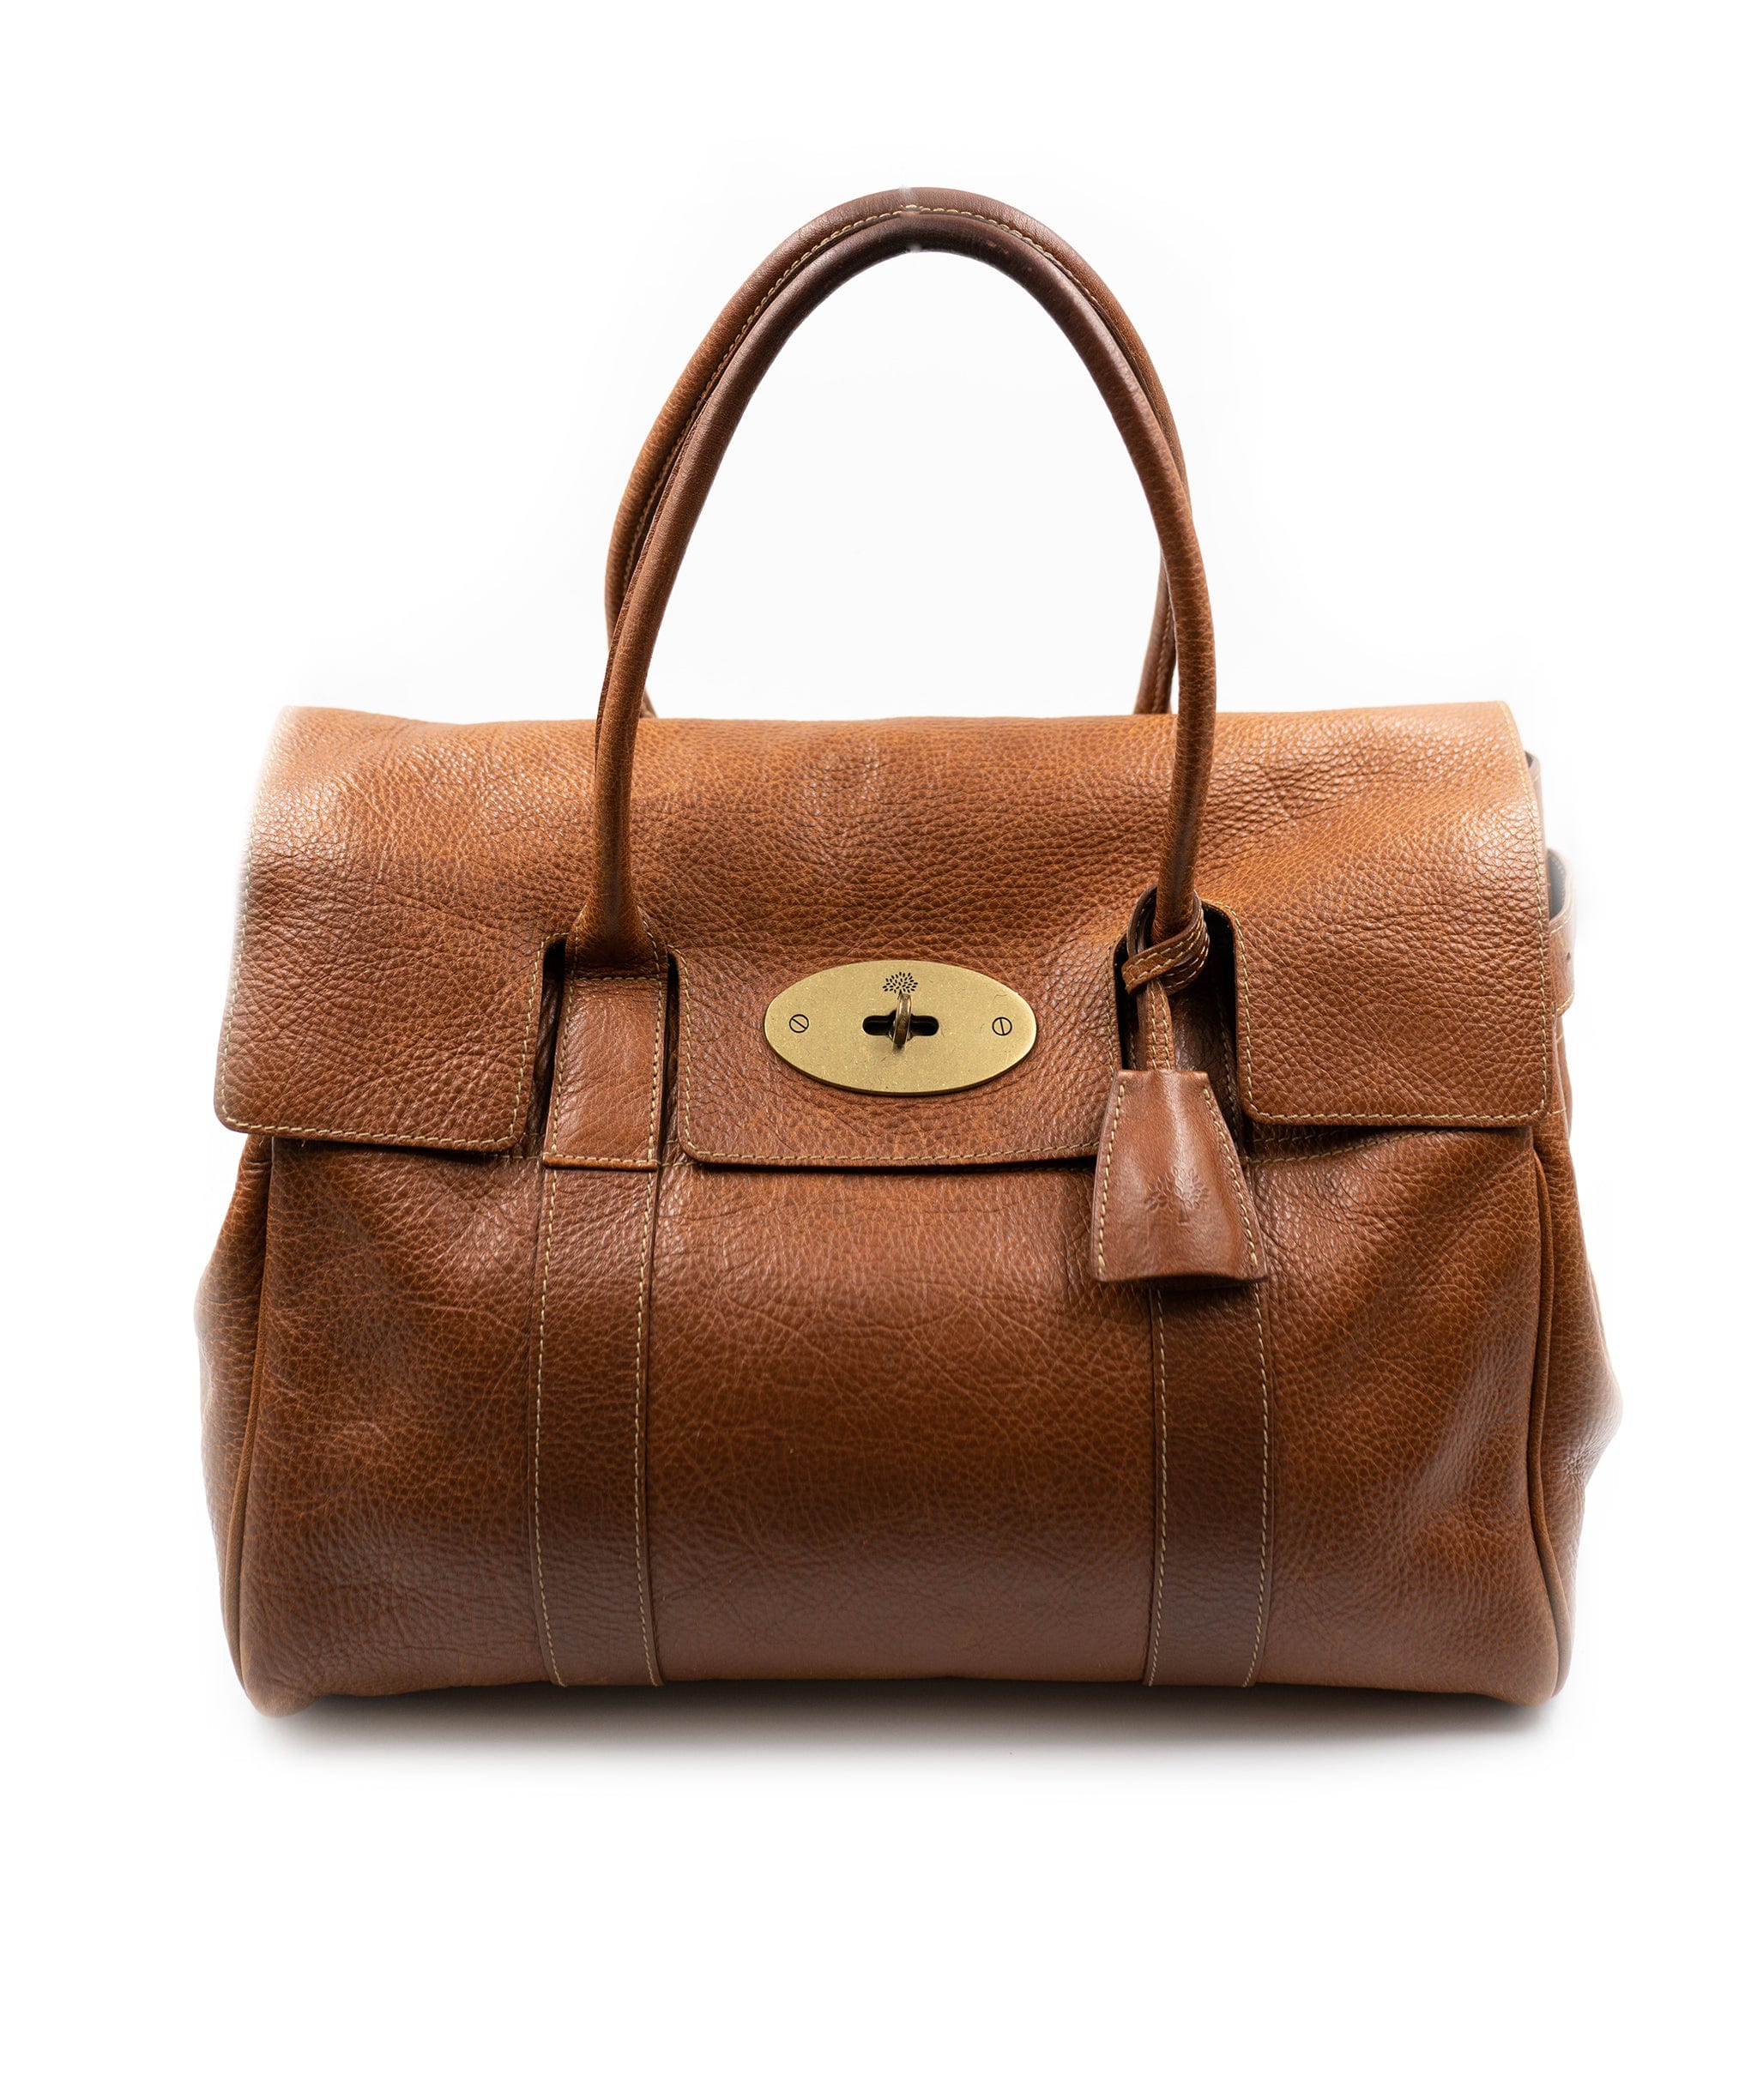 Mulberry Mulberry bayswater  - AGL2027